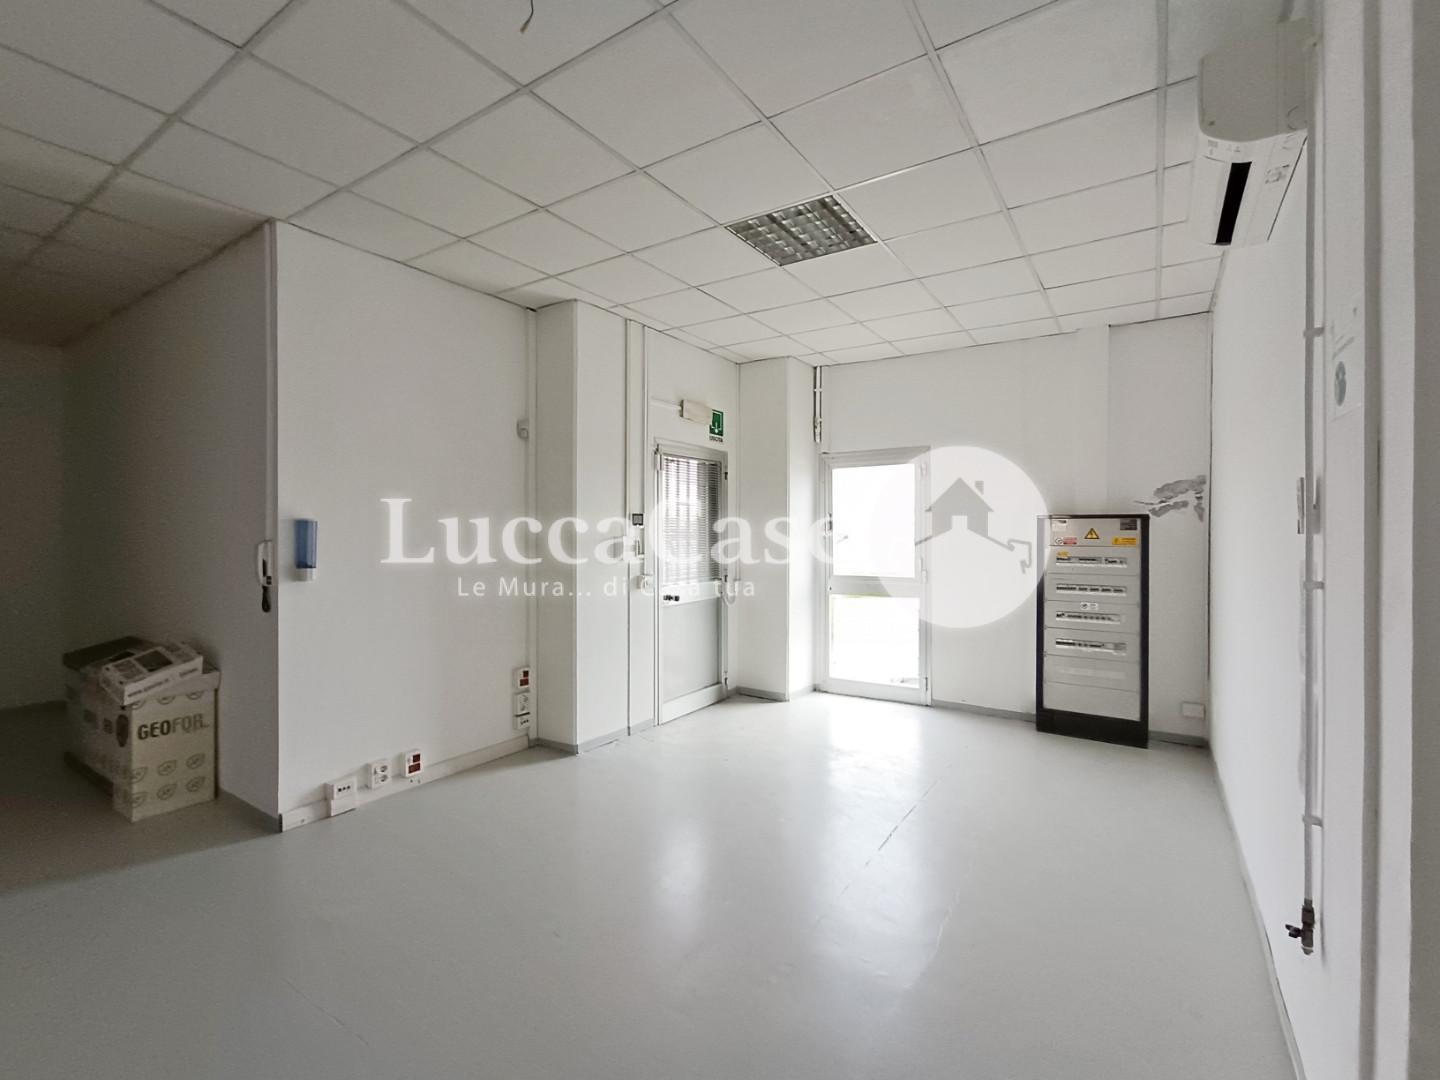 Office for commercial rentals in San Giuliano Terme (PI)